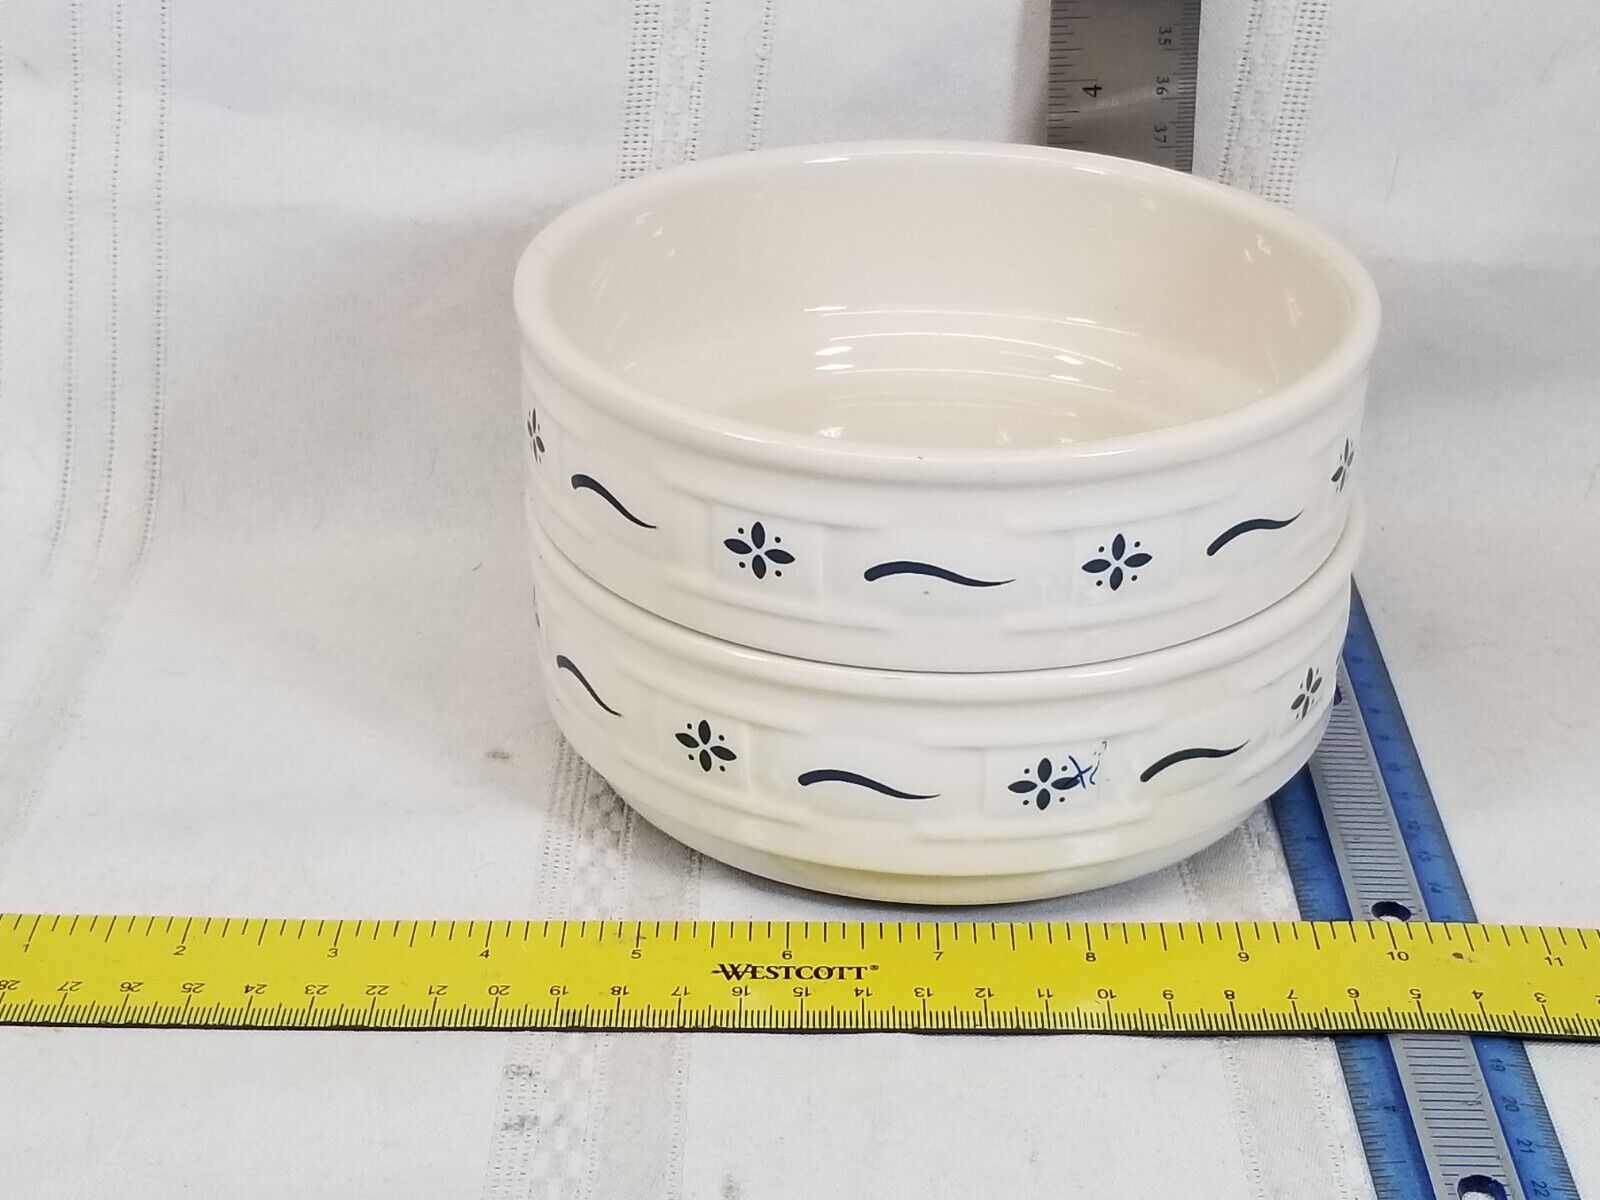 2 LONGABERGER BOWL Soup Cereal Woven Traditions Blue Stackable USA Pottery